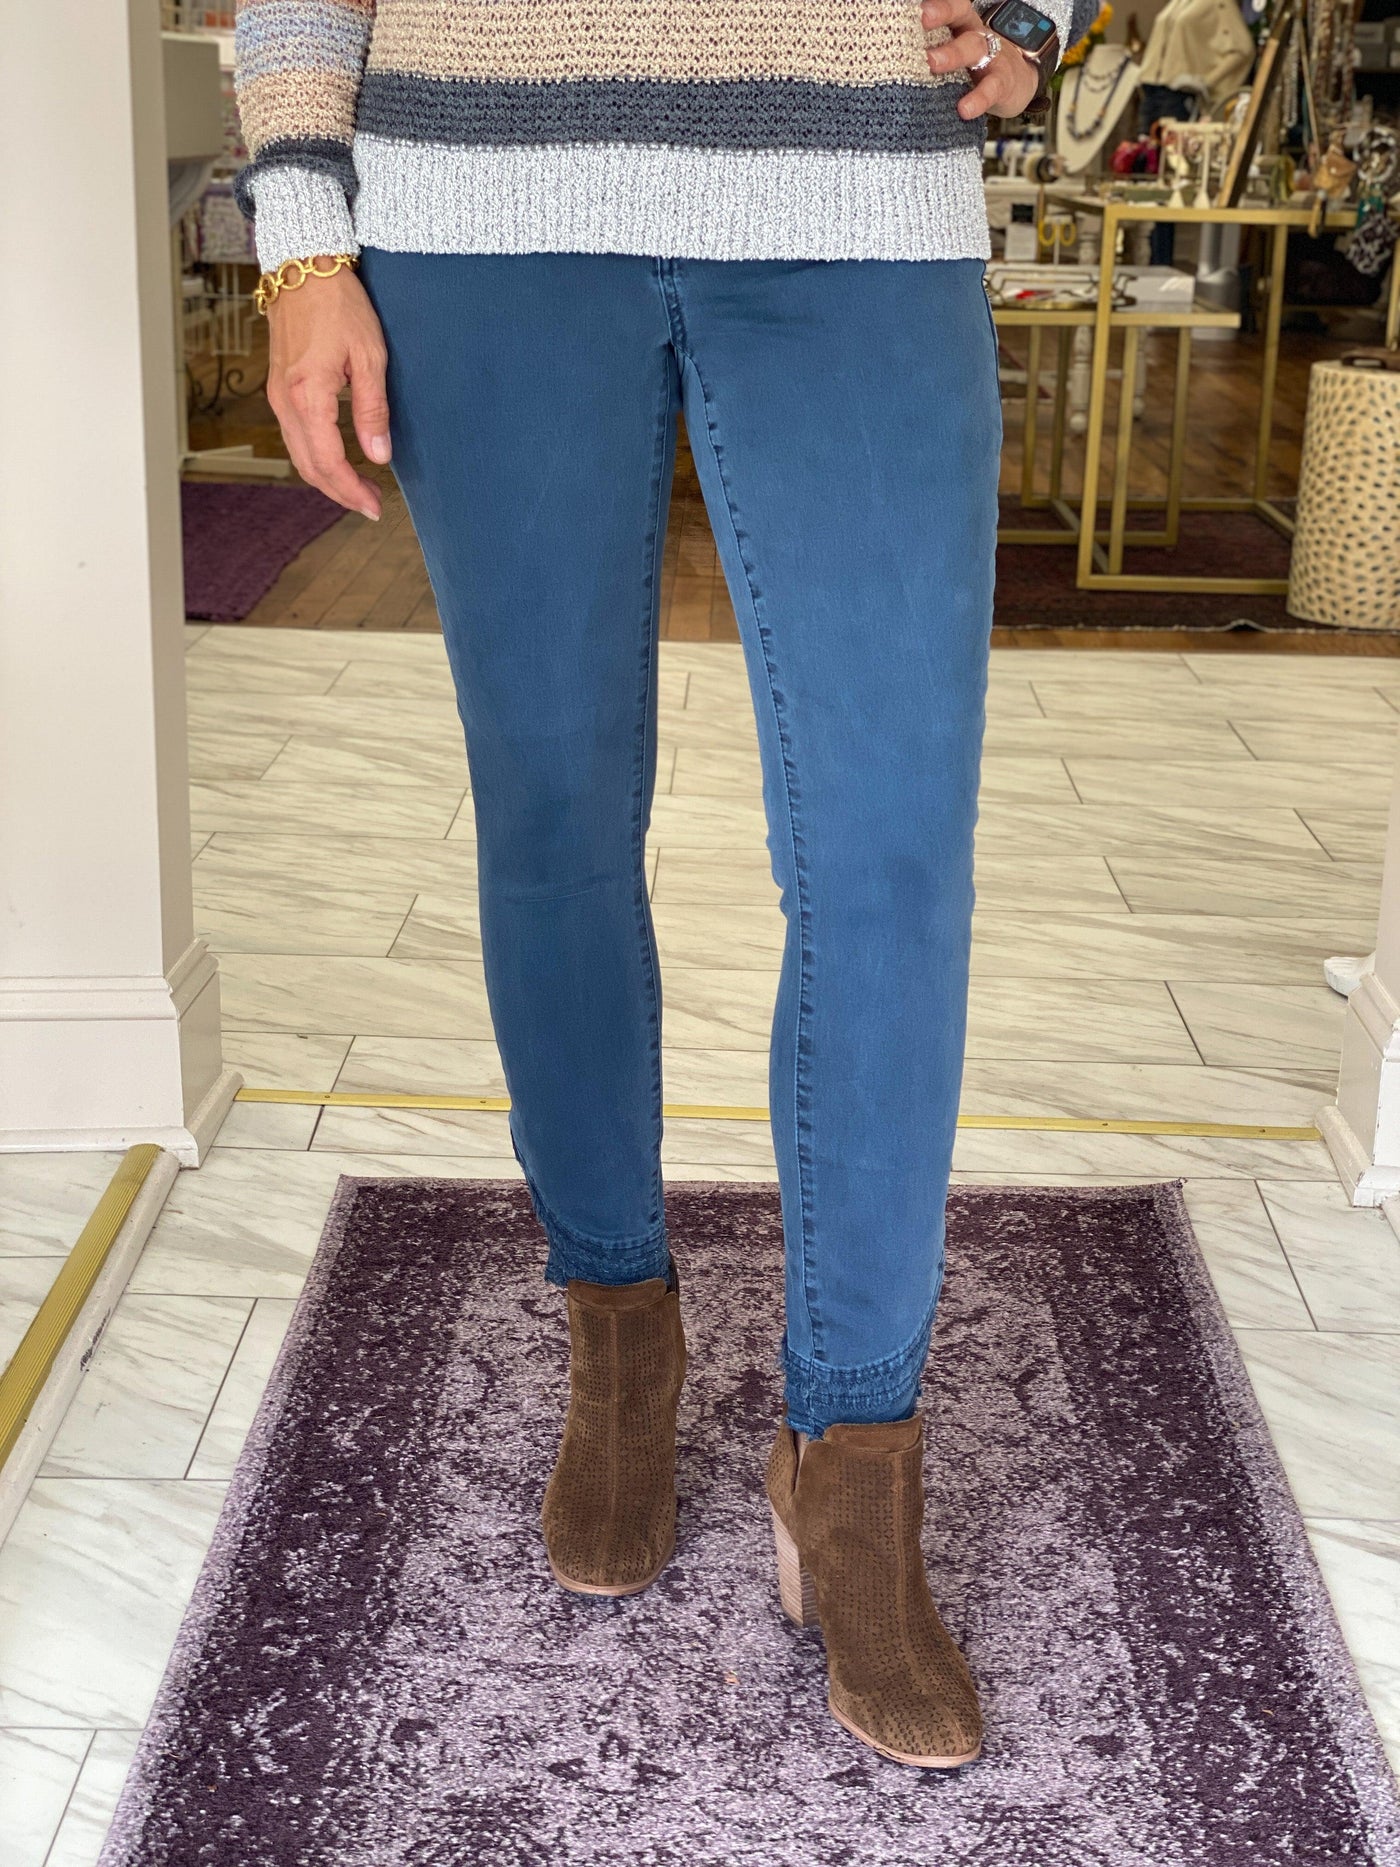 Model wearing balsam colored denim pants with frayed edge hem and brown booties.